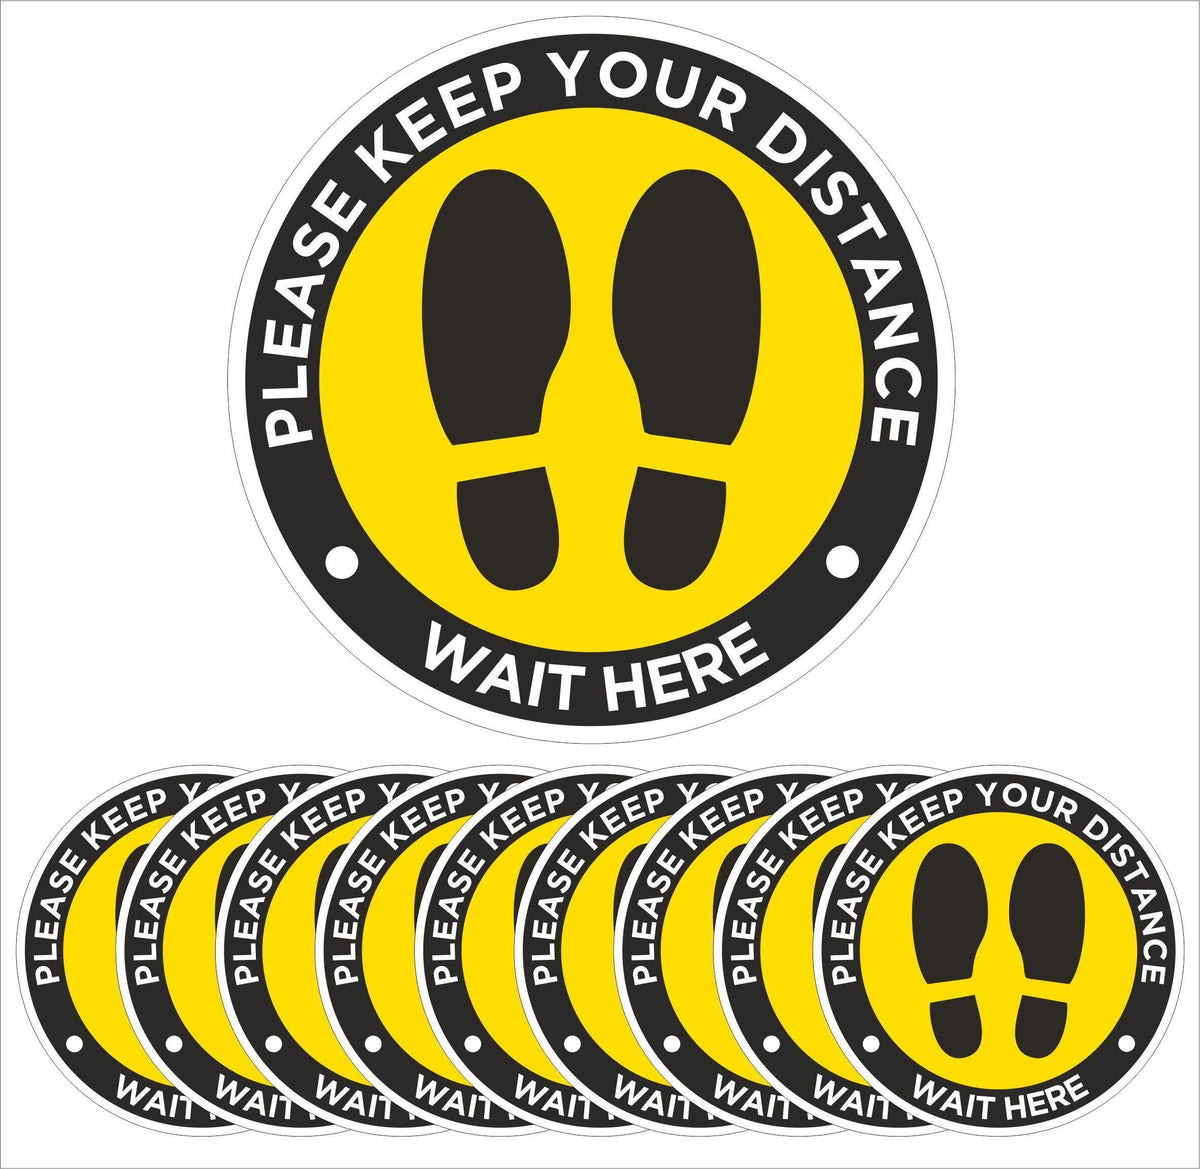 Wait Here - Please Keep Your Distance - Social Distancing Floor Graphic (Roundel) 